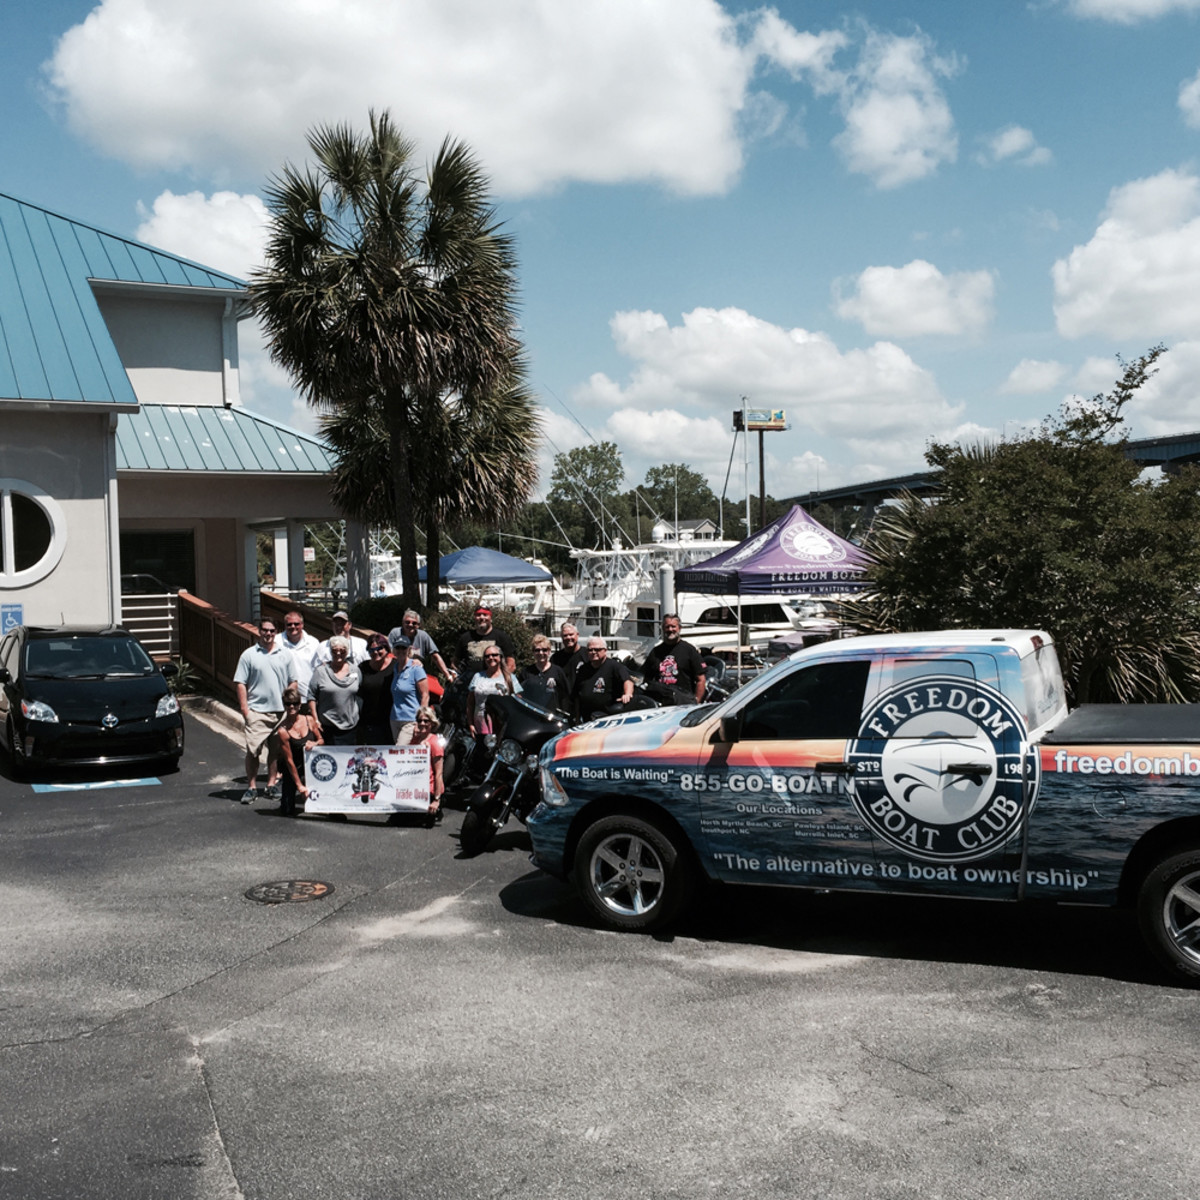 The tour riders visited the “Grand Strand” Freedom Boat Club franchise Monday in North Myrtle Beach, S.C.